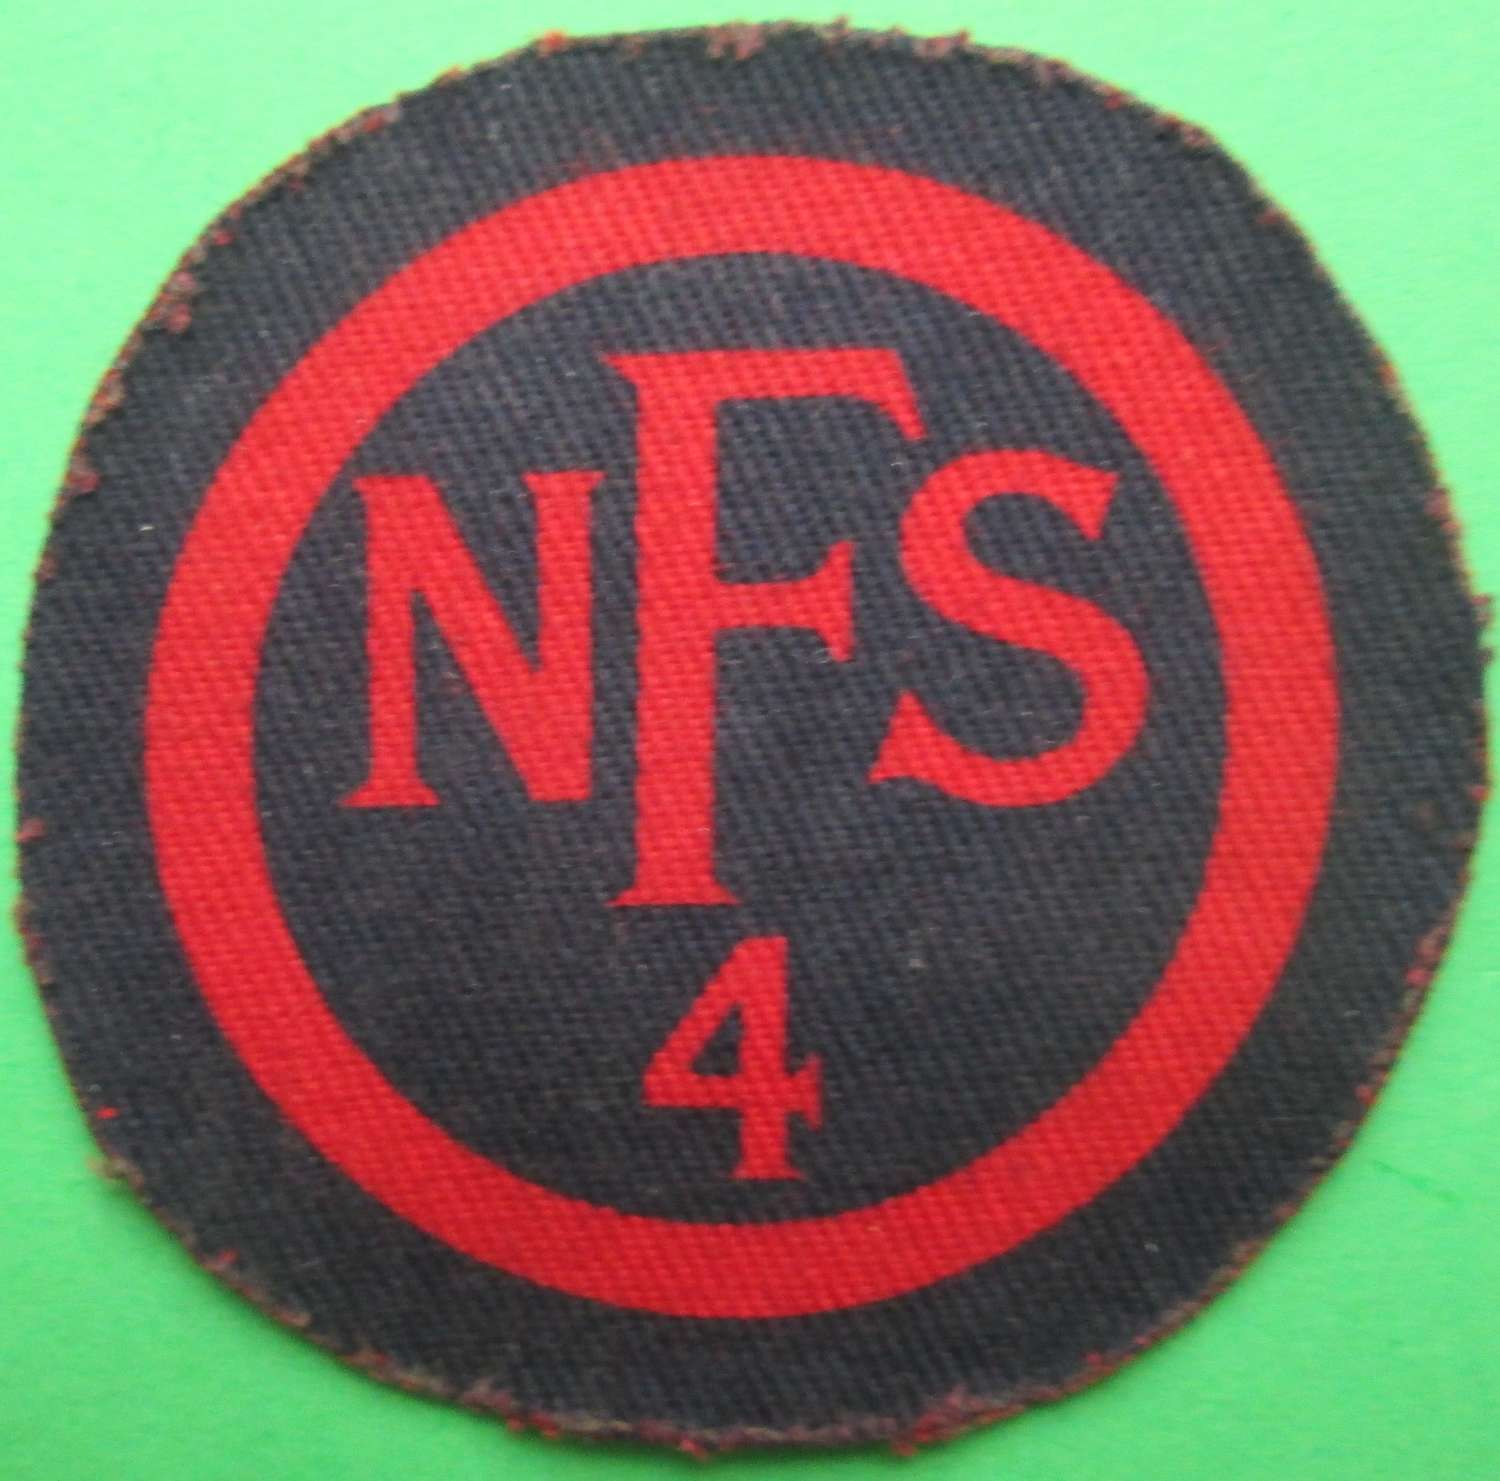 A NATIONAL FIRE SERVICE BADGE FOR ZONE 4